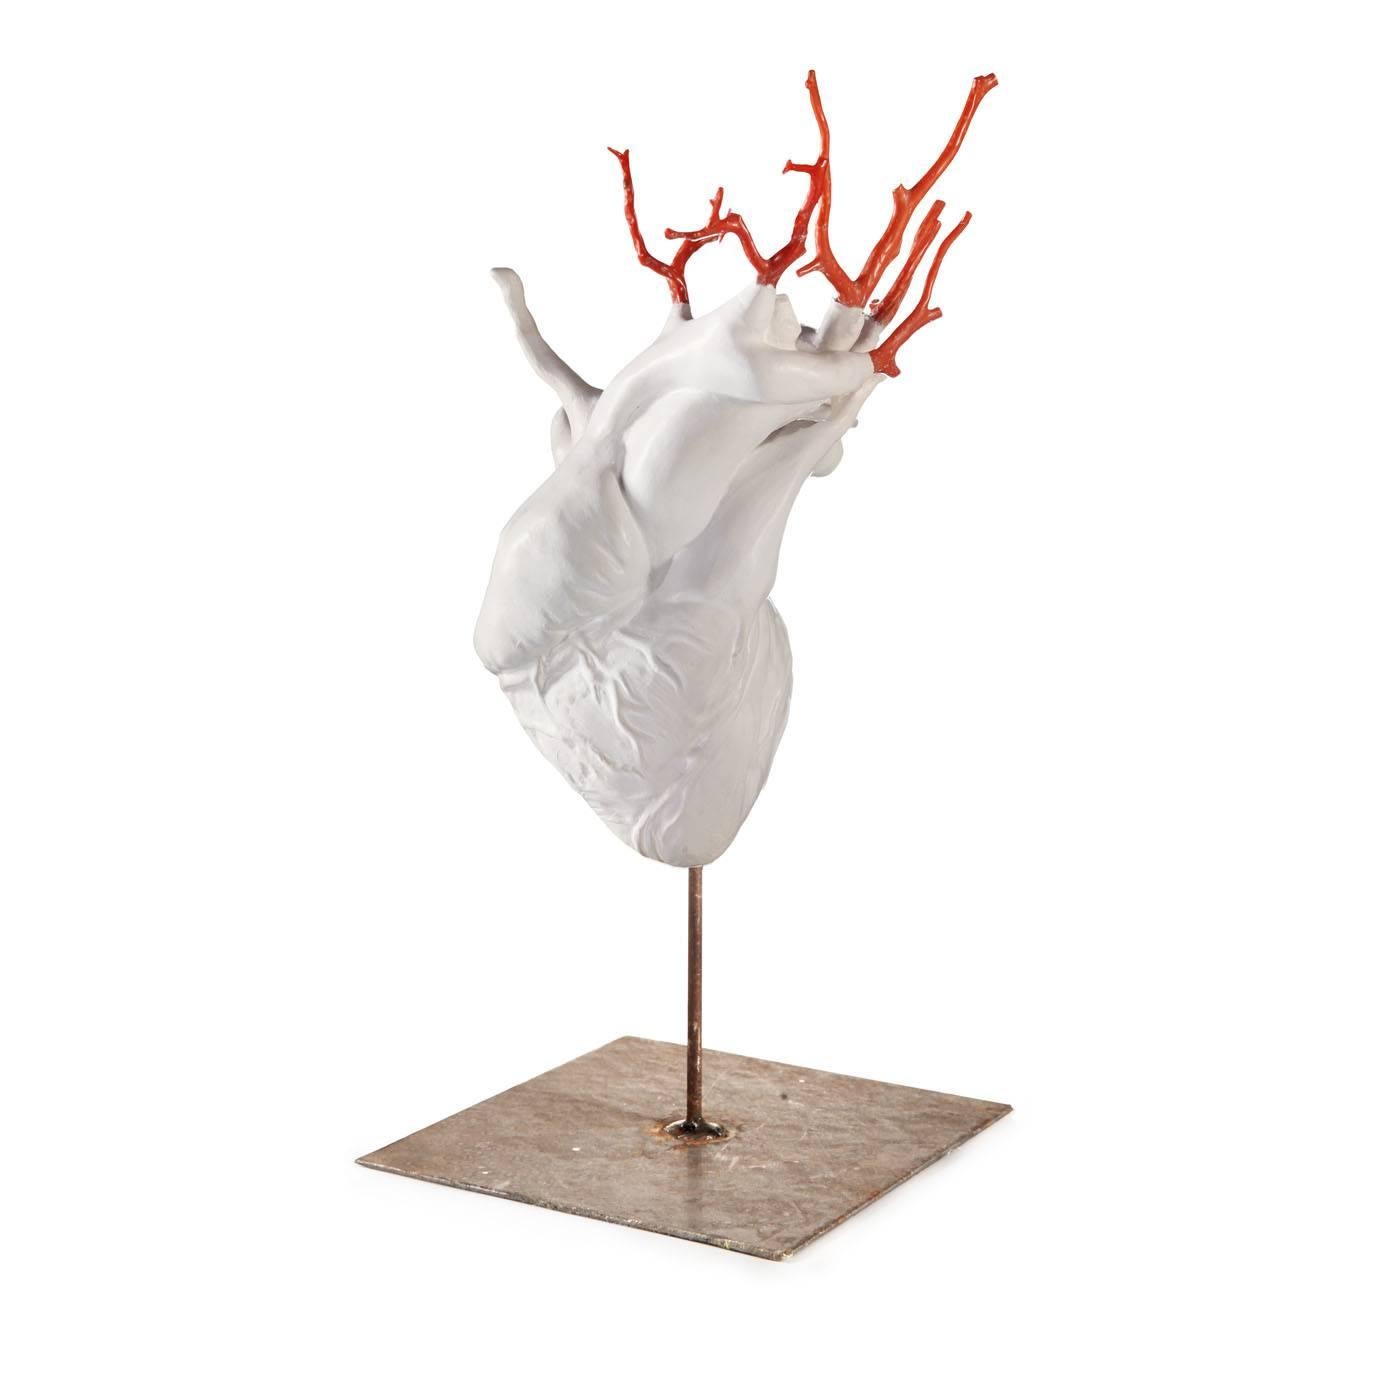 A white heart-shaped sculpture with terracotta coral tree branches jutting out on top, depicting arteries and veins which suggest the idea of man’s union with nature through art, made with miscellaneous materials and a rough surface.